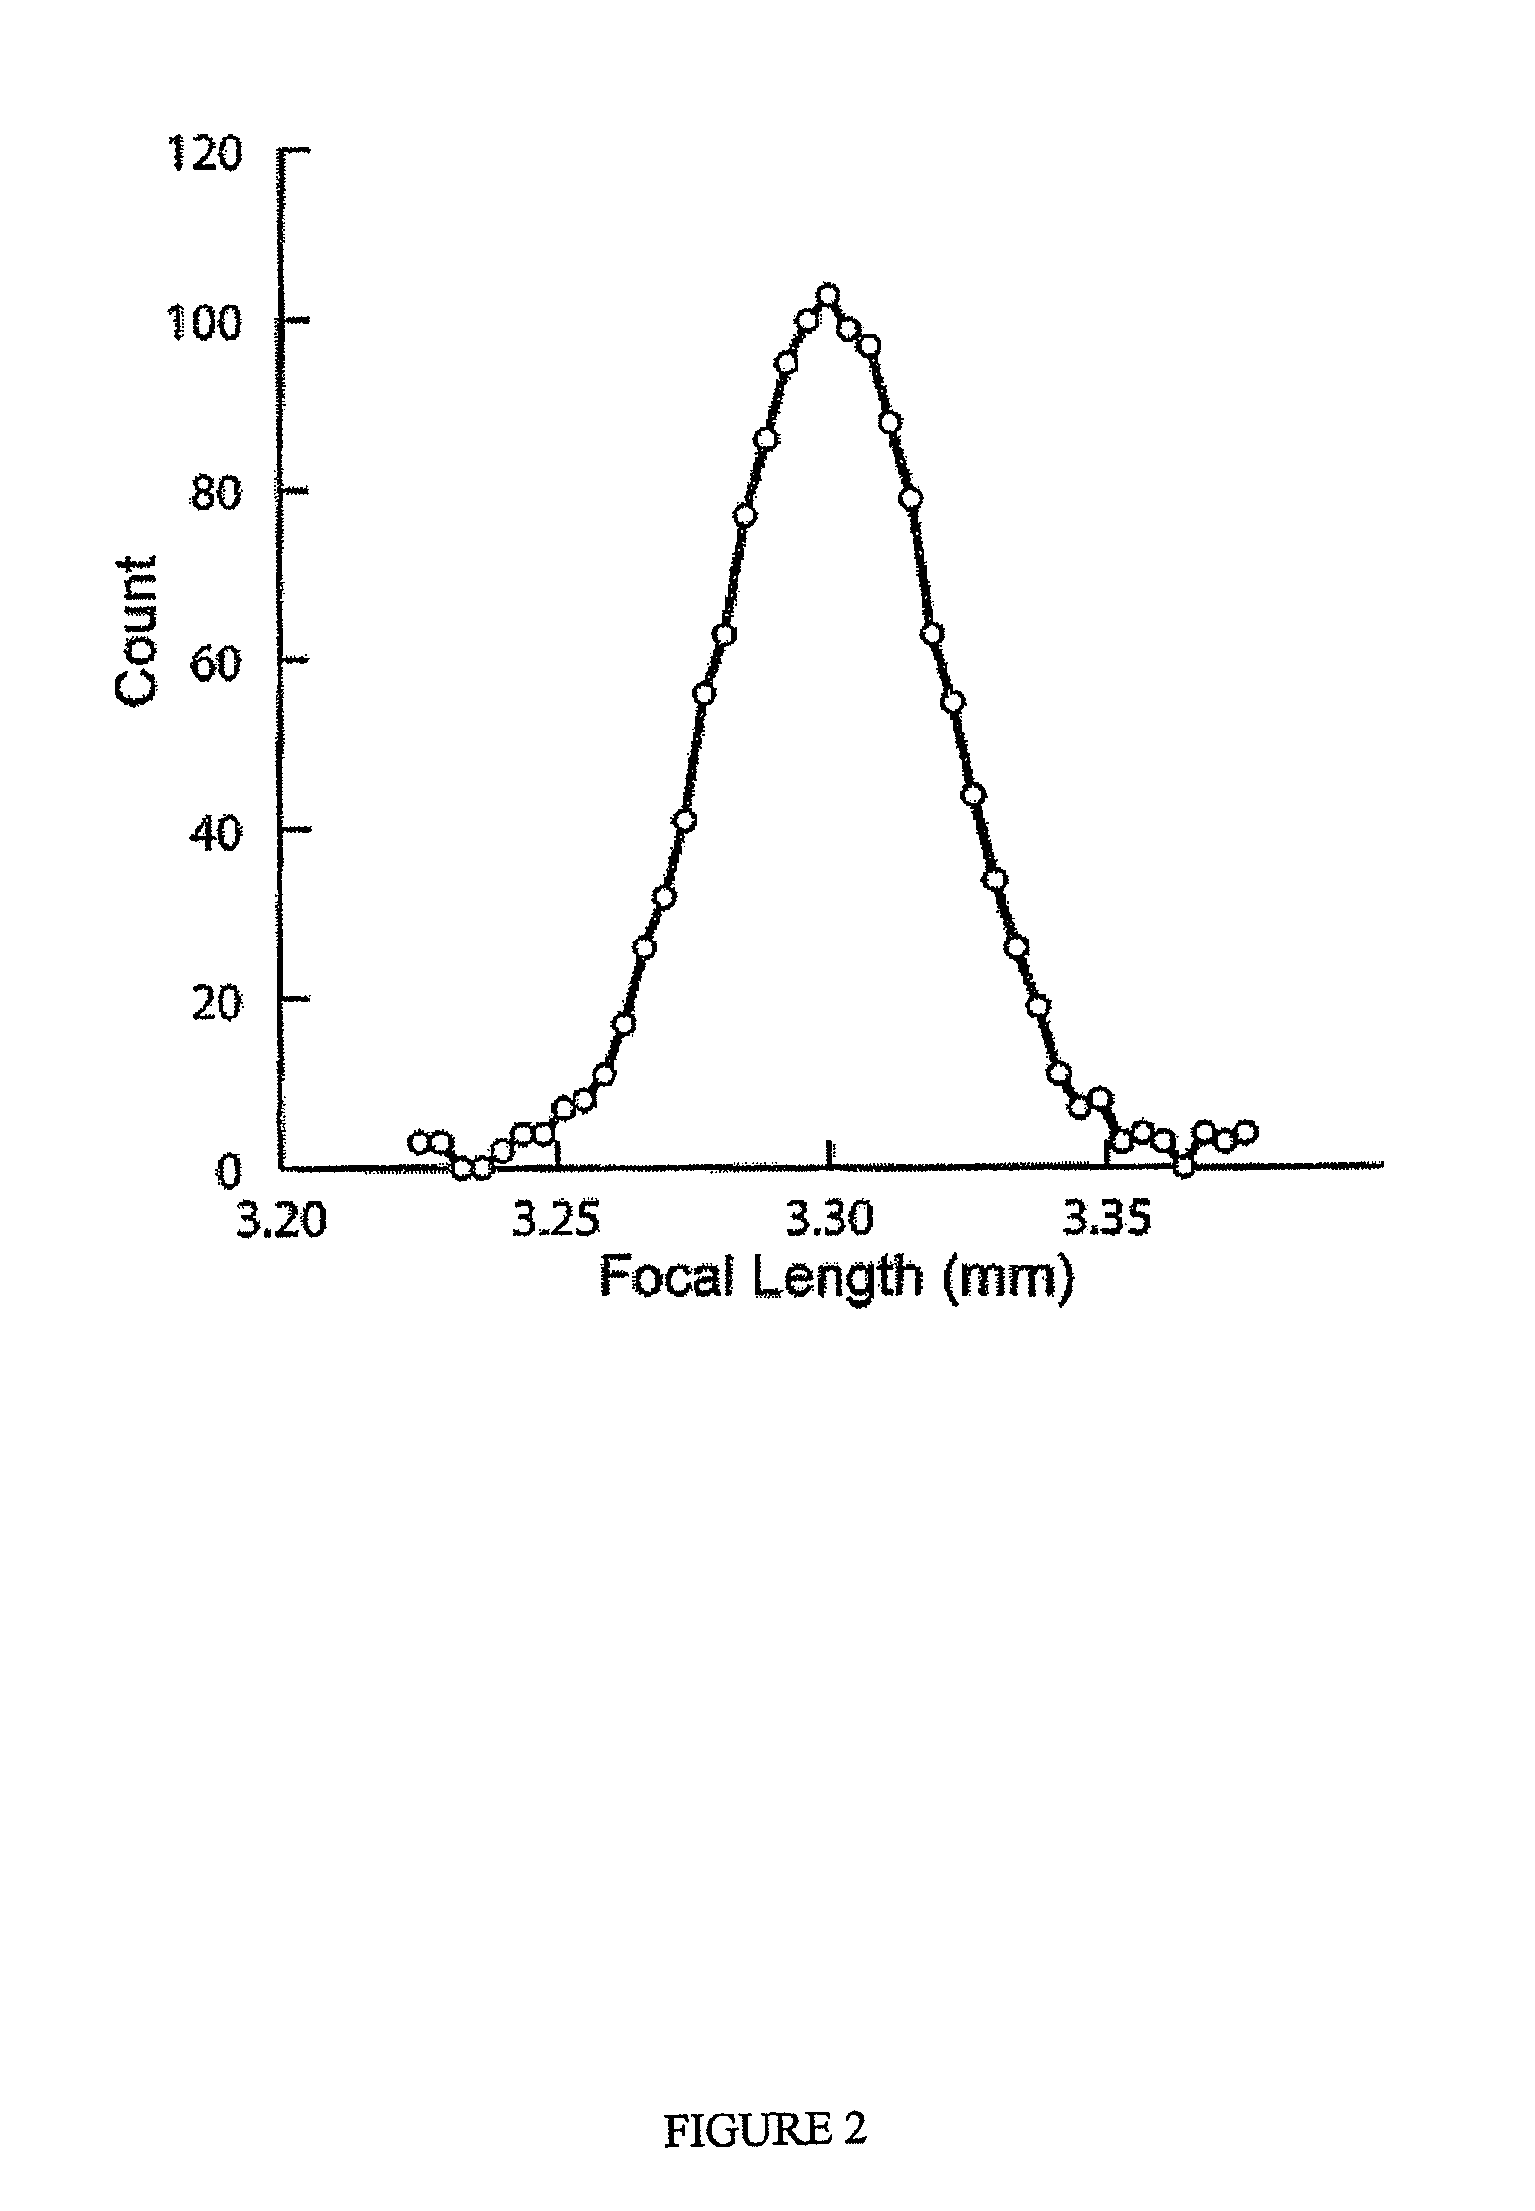 Focus compensation for optical elements and applications thereof